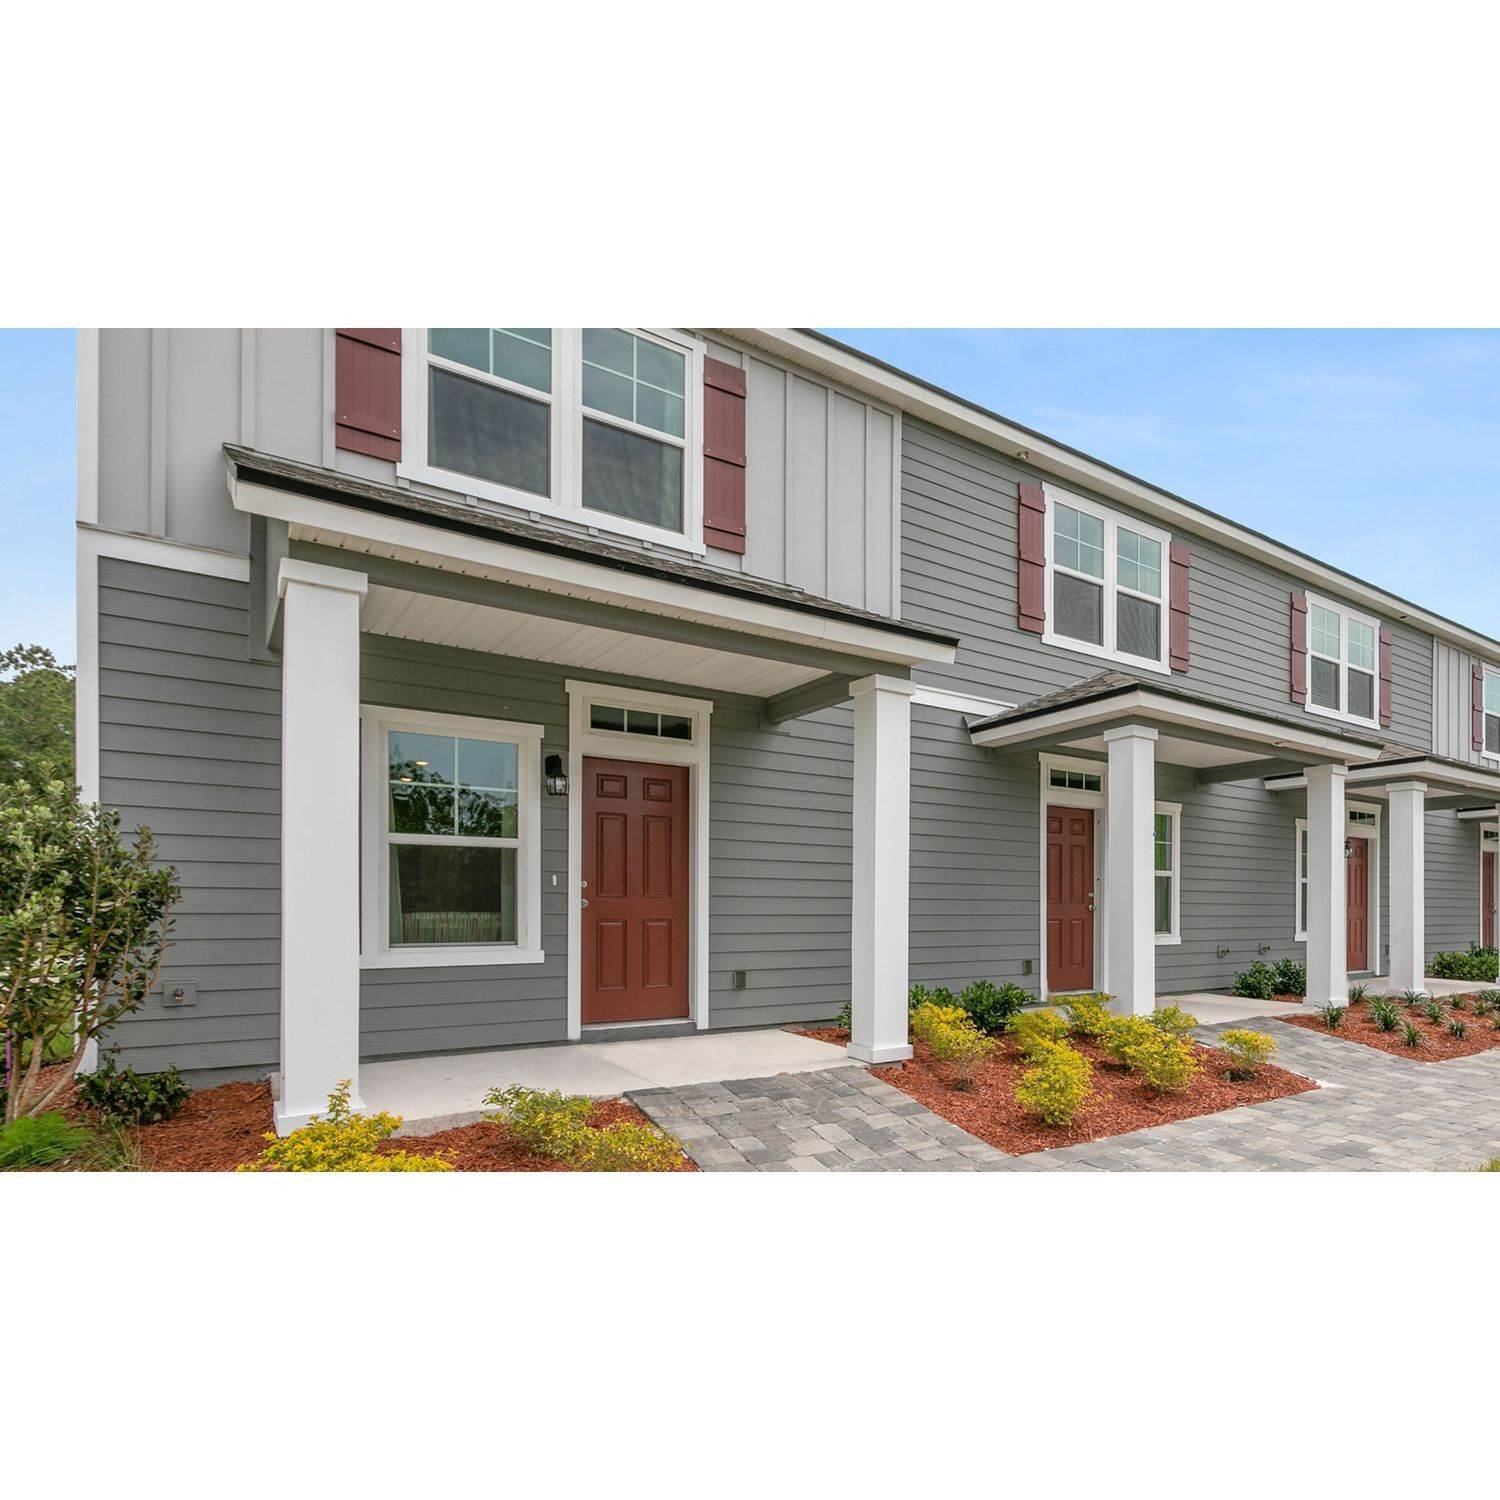 21. Nassau Crossing Townhomes building at 86400 Mainline Rd., Yulee, FL 32097